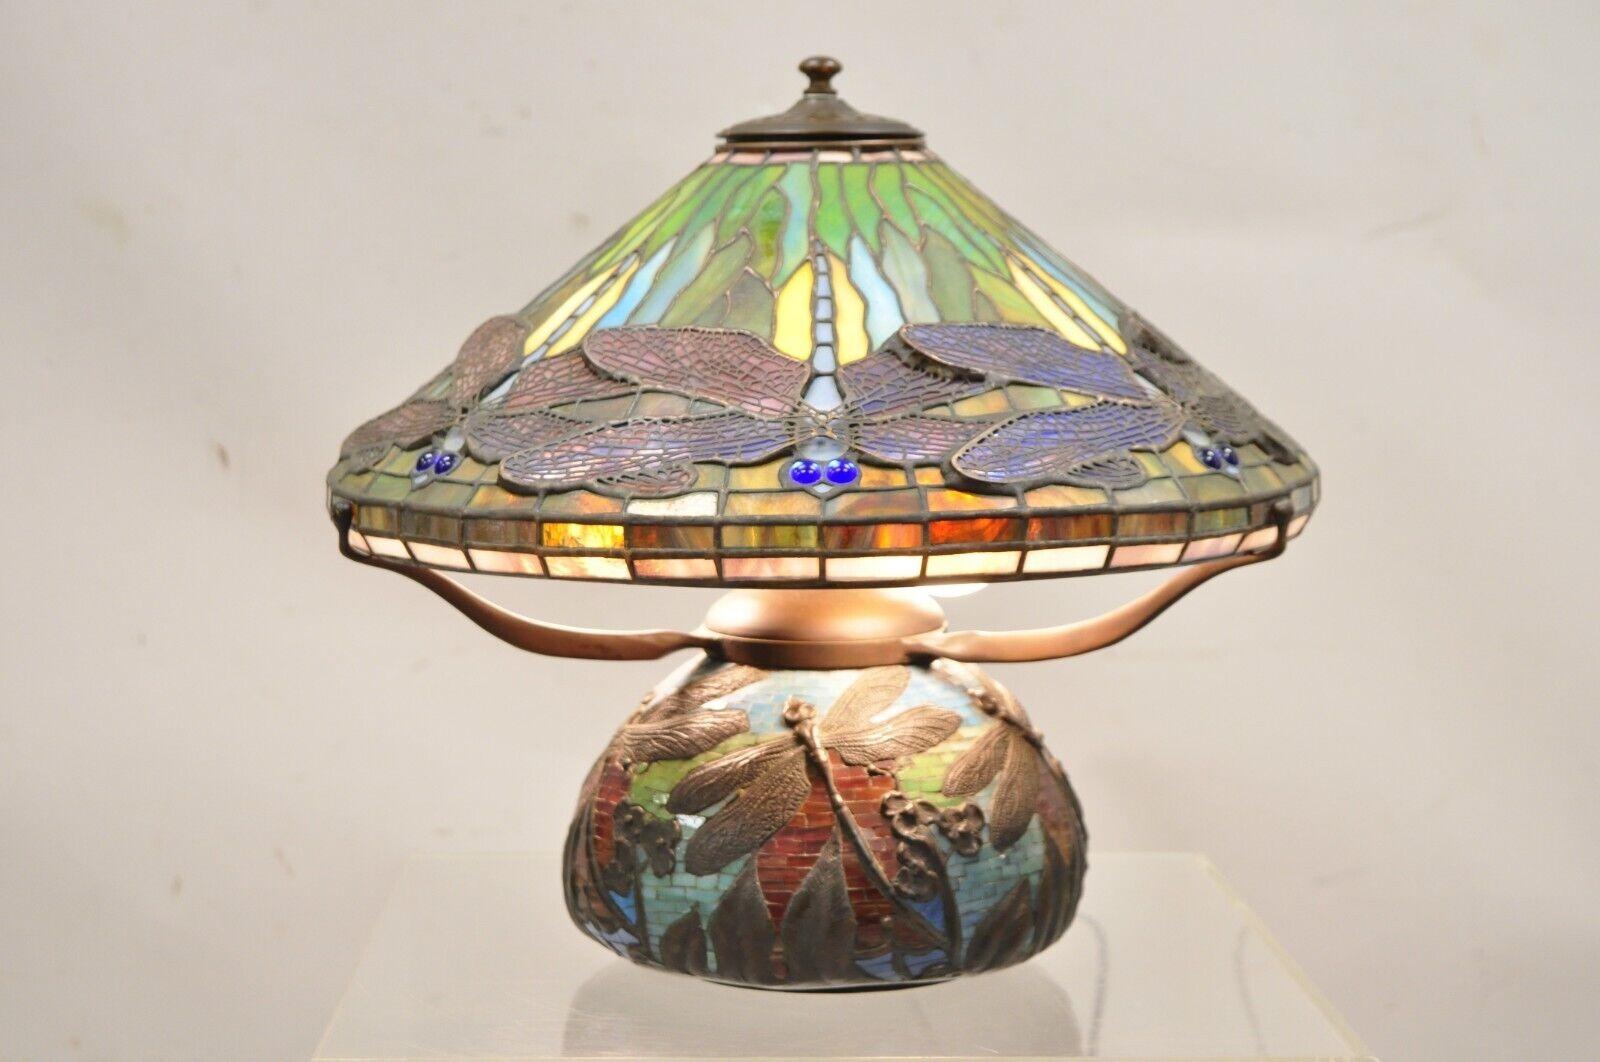 Vintage Tiffany Style High Quality Bronze and Leaded Stained Glass Blue Eye Dragonfly Table Lamp. Circa Mid to Late 20th Century. Measurements: 14